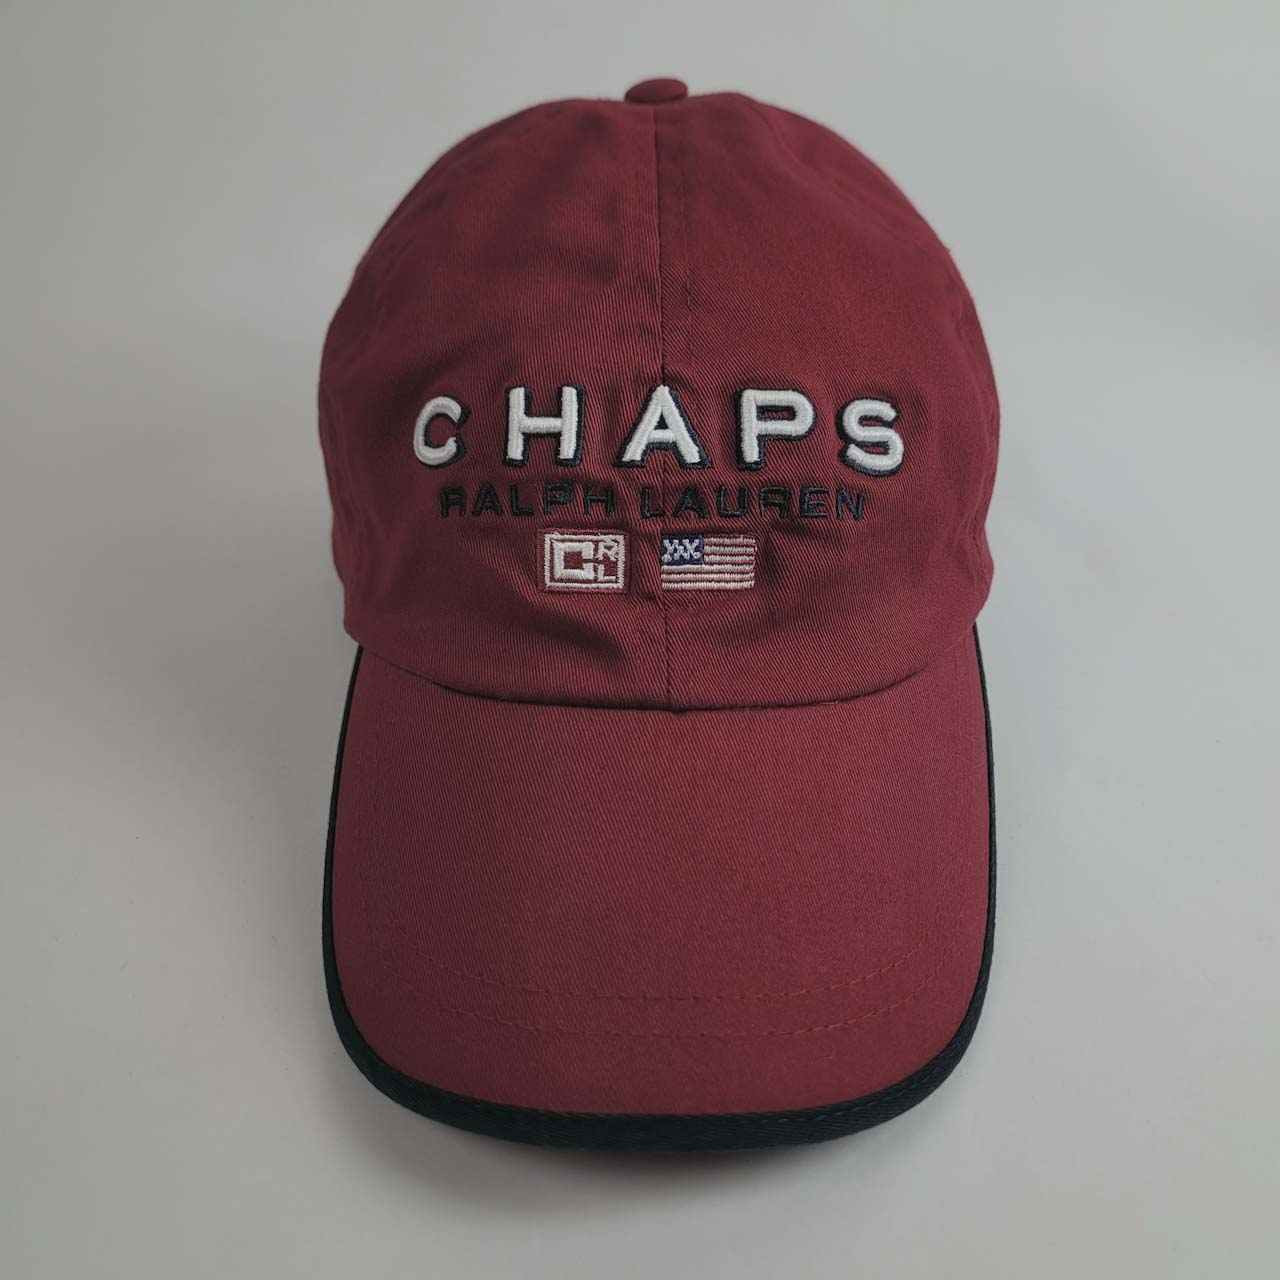 Cap - Chaps Ralph Lauren - Red - Embroidered Front - Fitted